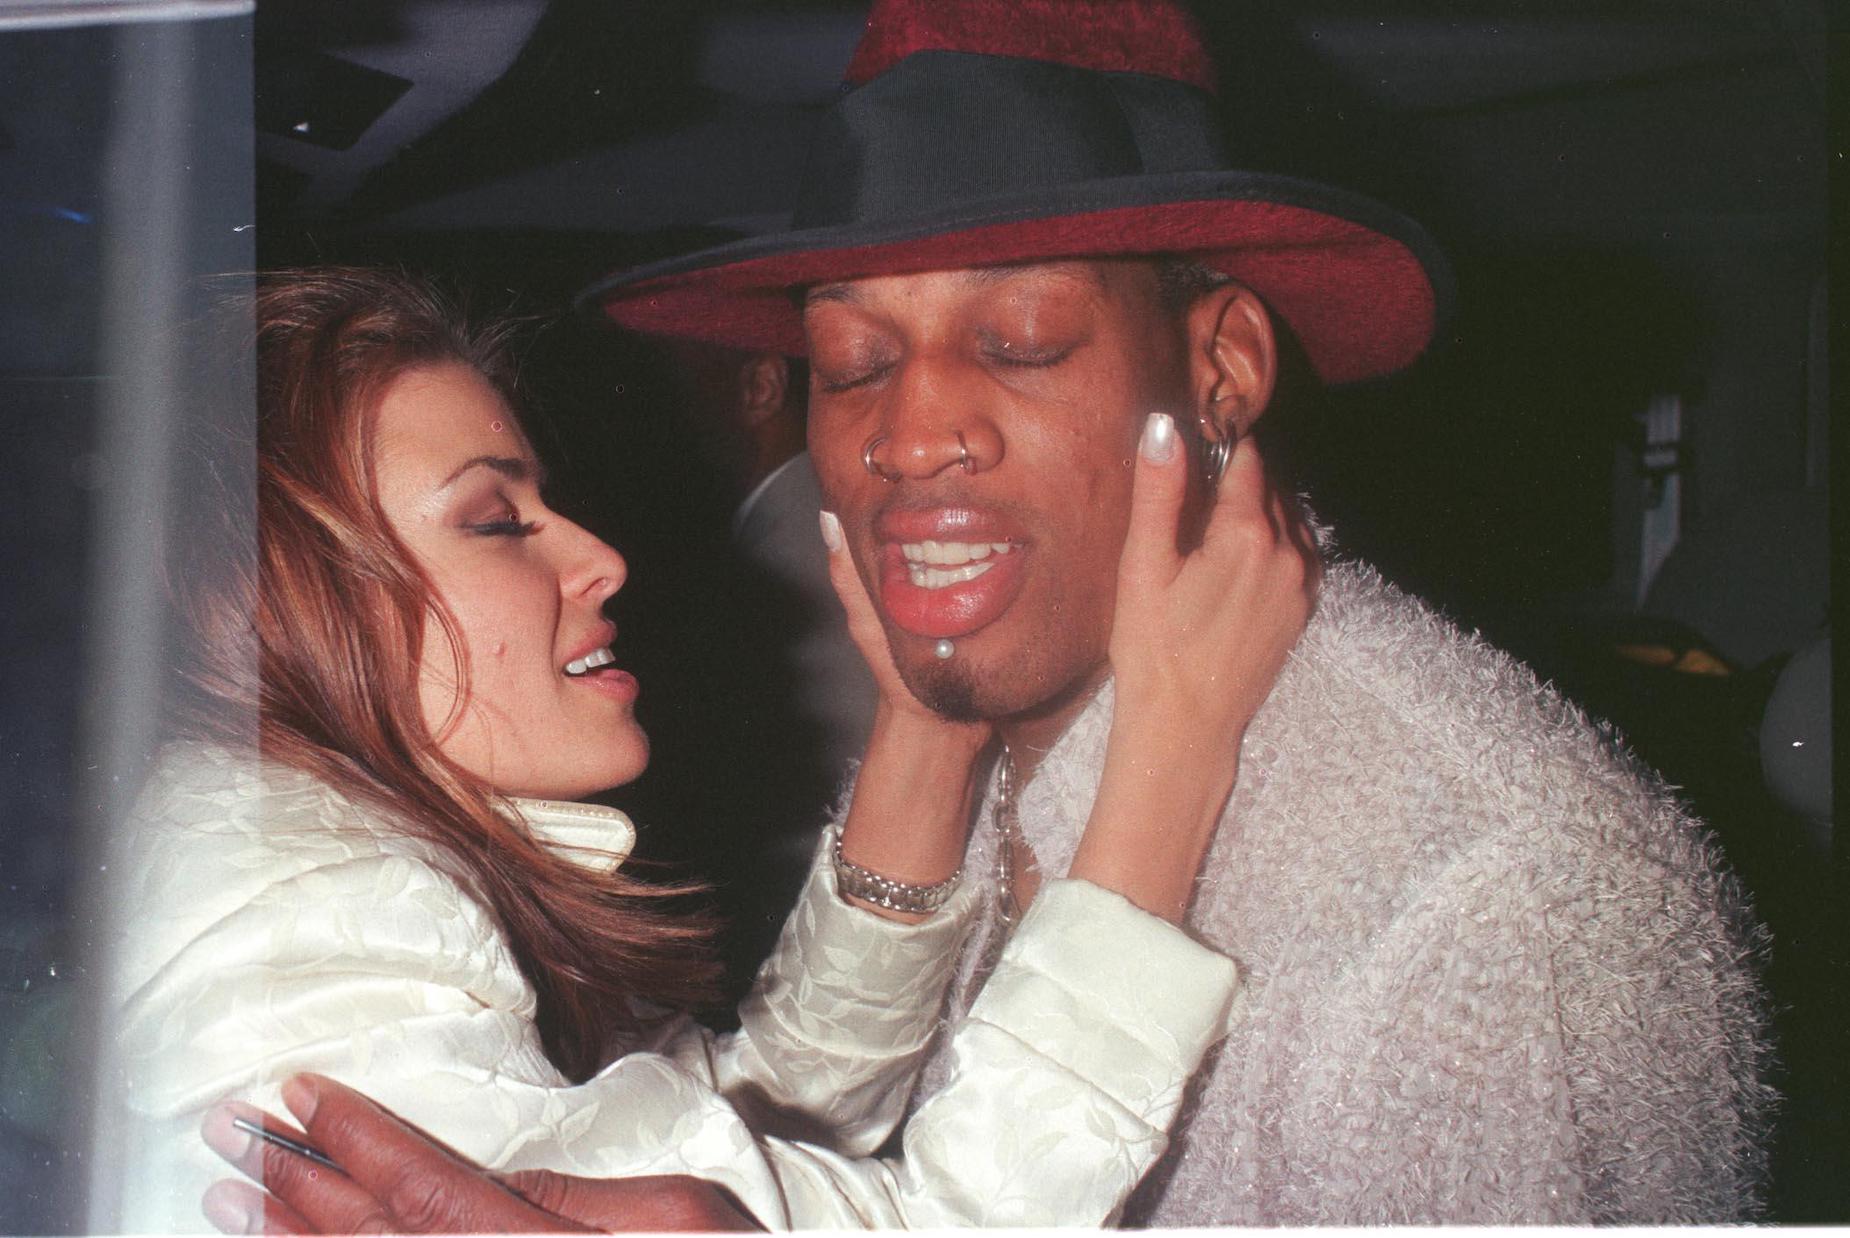 Dennis Rodman and Carmen Electra embrace in Beverly Hills during their time together.